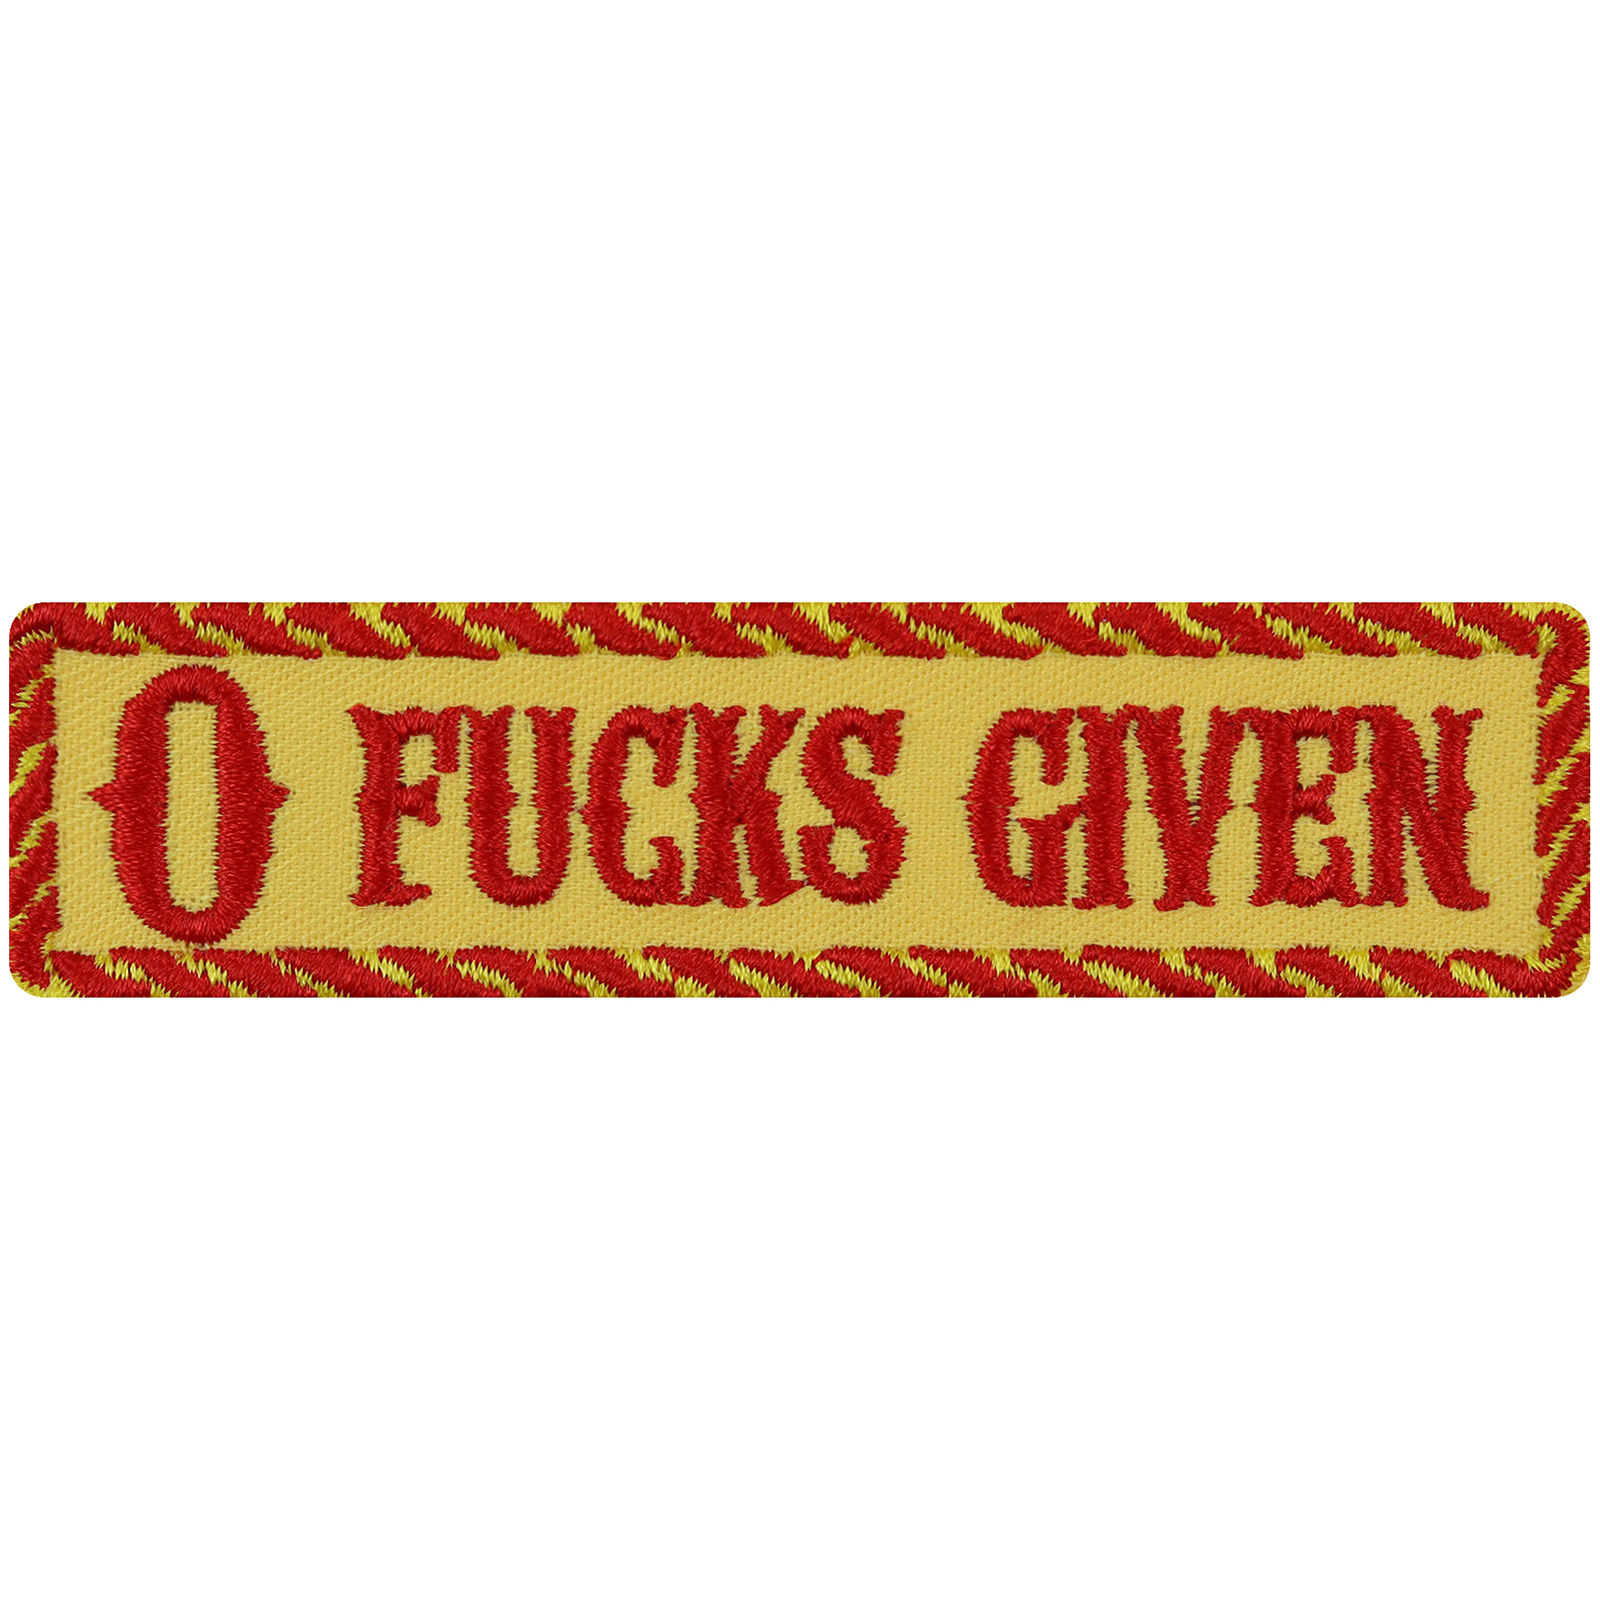 0 Fucks given - Patch